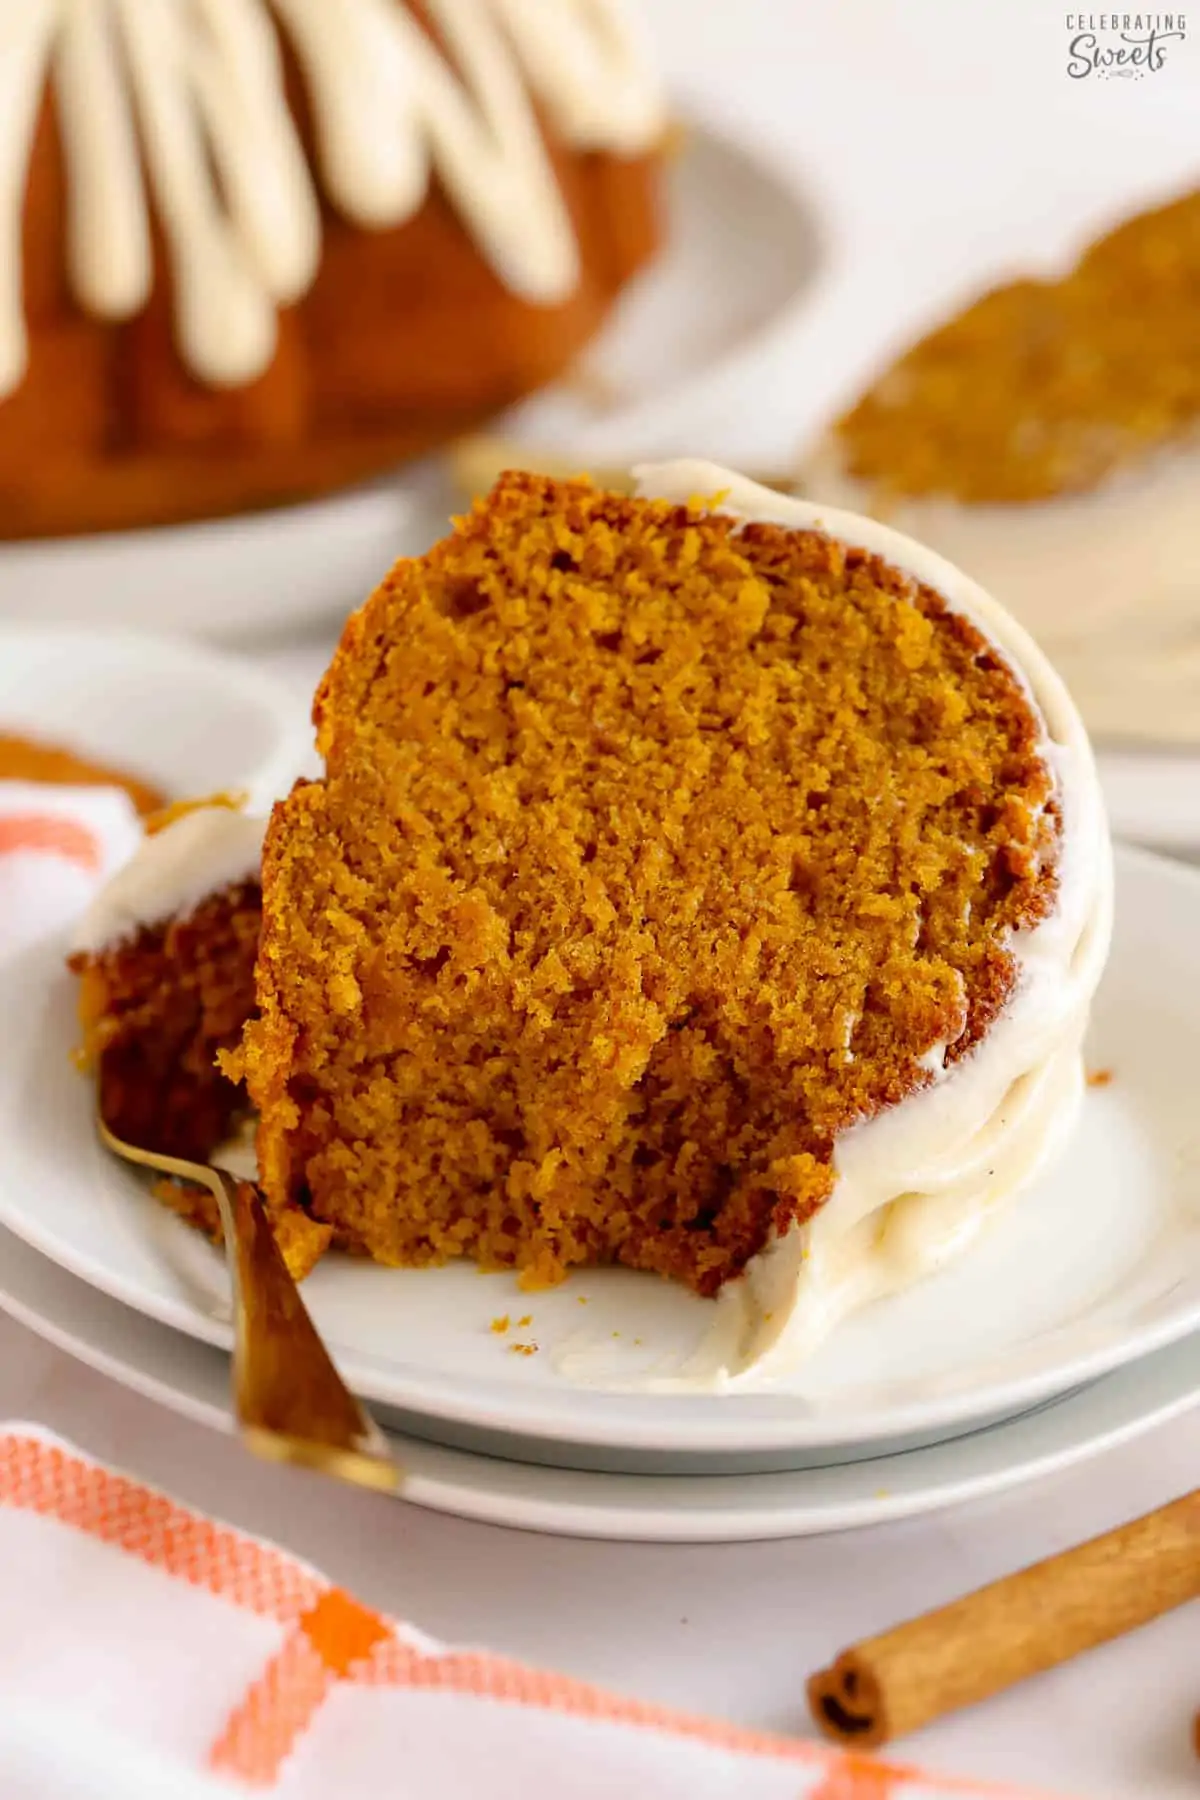 Slice of pumpkin bundt cake on a white plate with a gold fork.